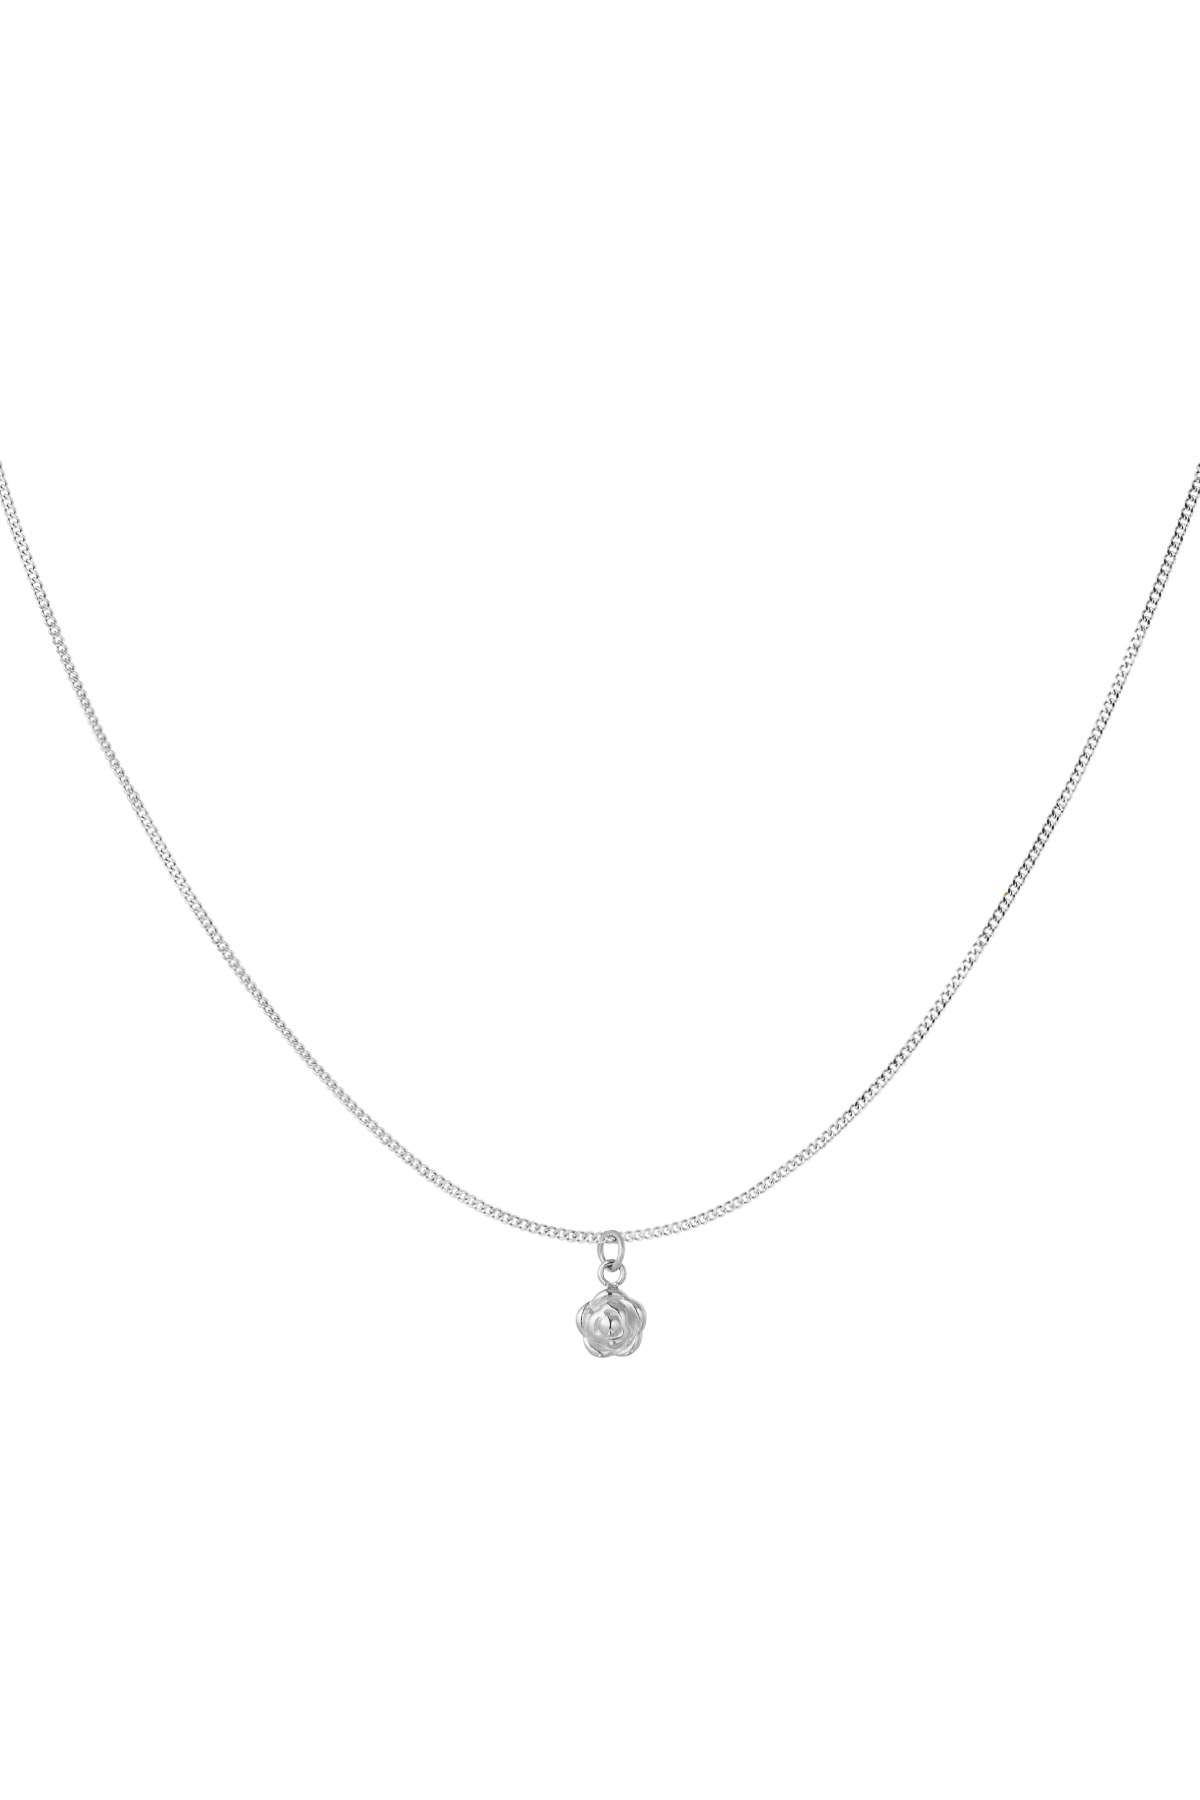 Simple necklace with flower charm - silver h5 